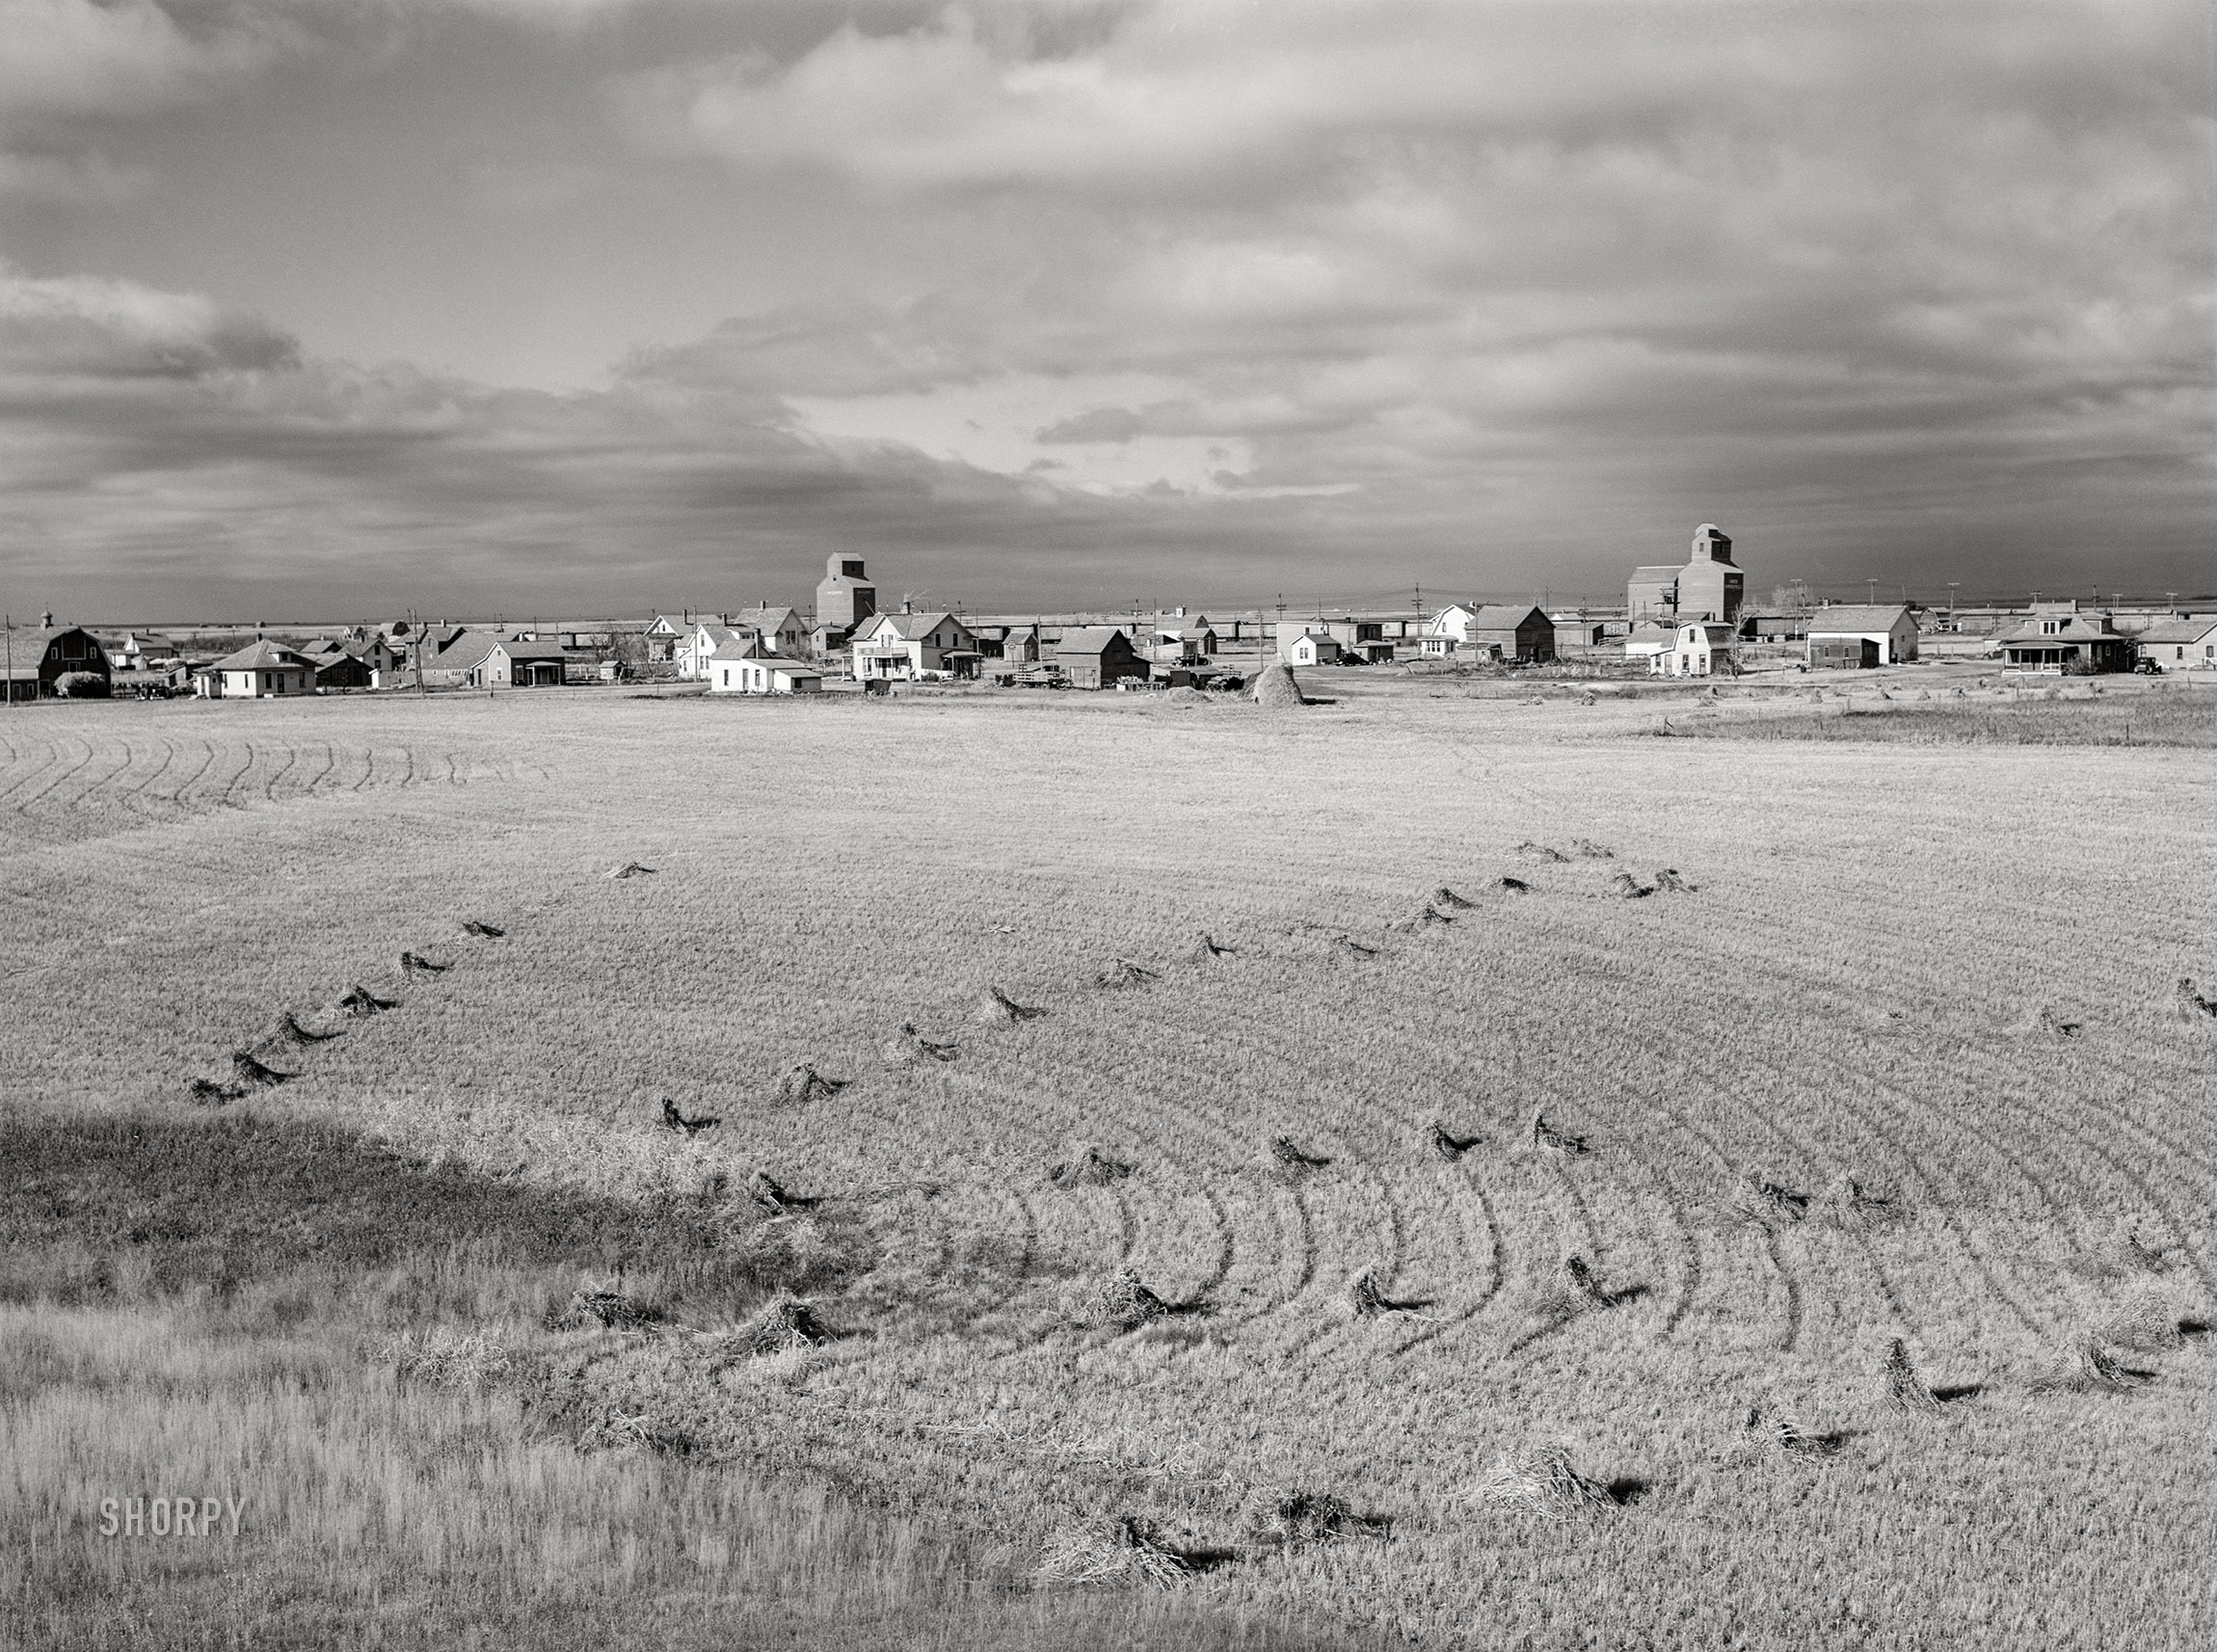 October 1940. "Surrey, Ward County, North Dakota." Medium format acetate negative by John Vachon for the Farm Security Administration. View full size.